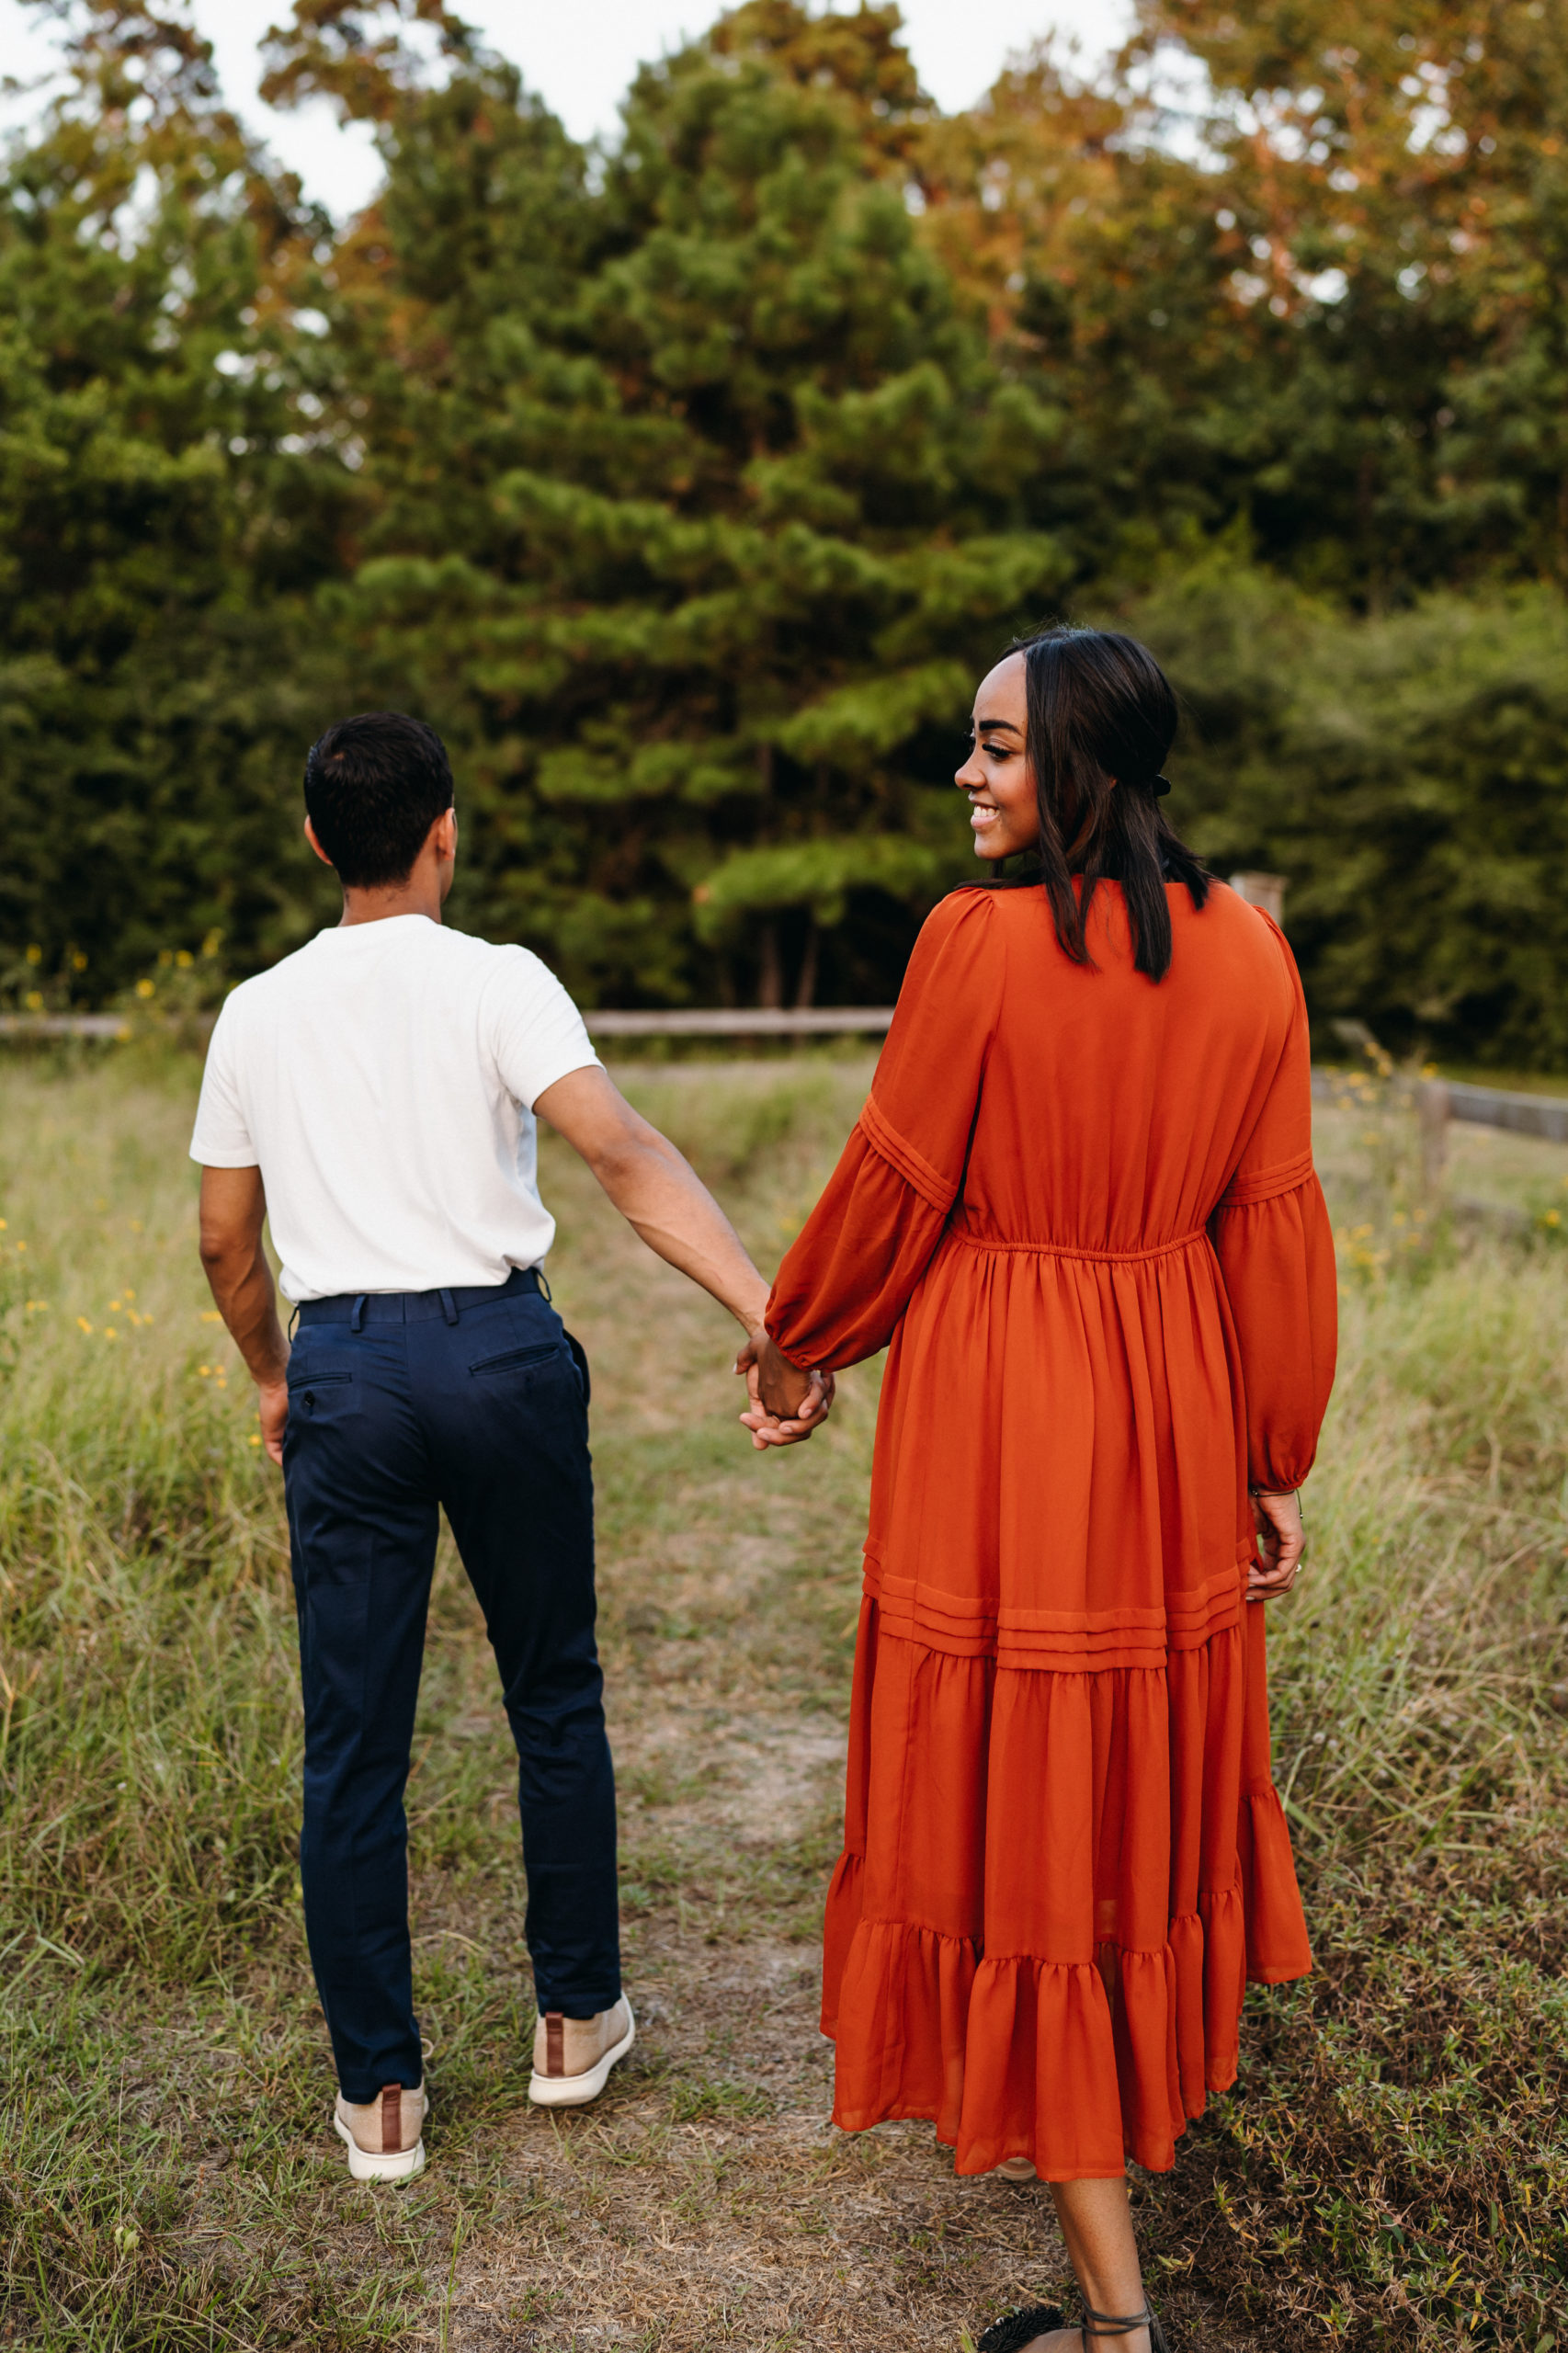 A couple walking in a garden for their engagement pictures done by Angelina Loreta Photography in Houston, Texas.